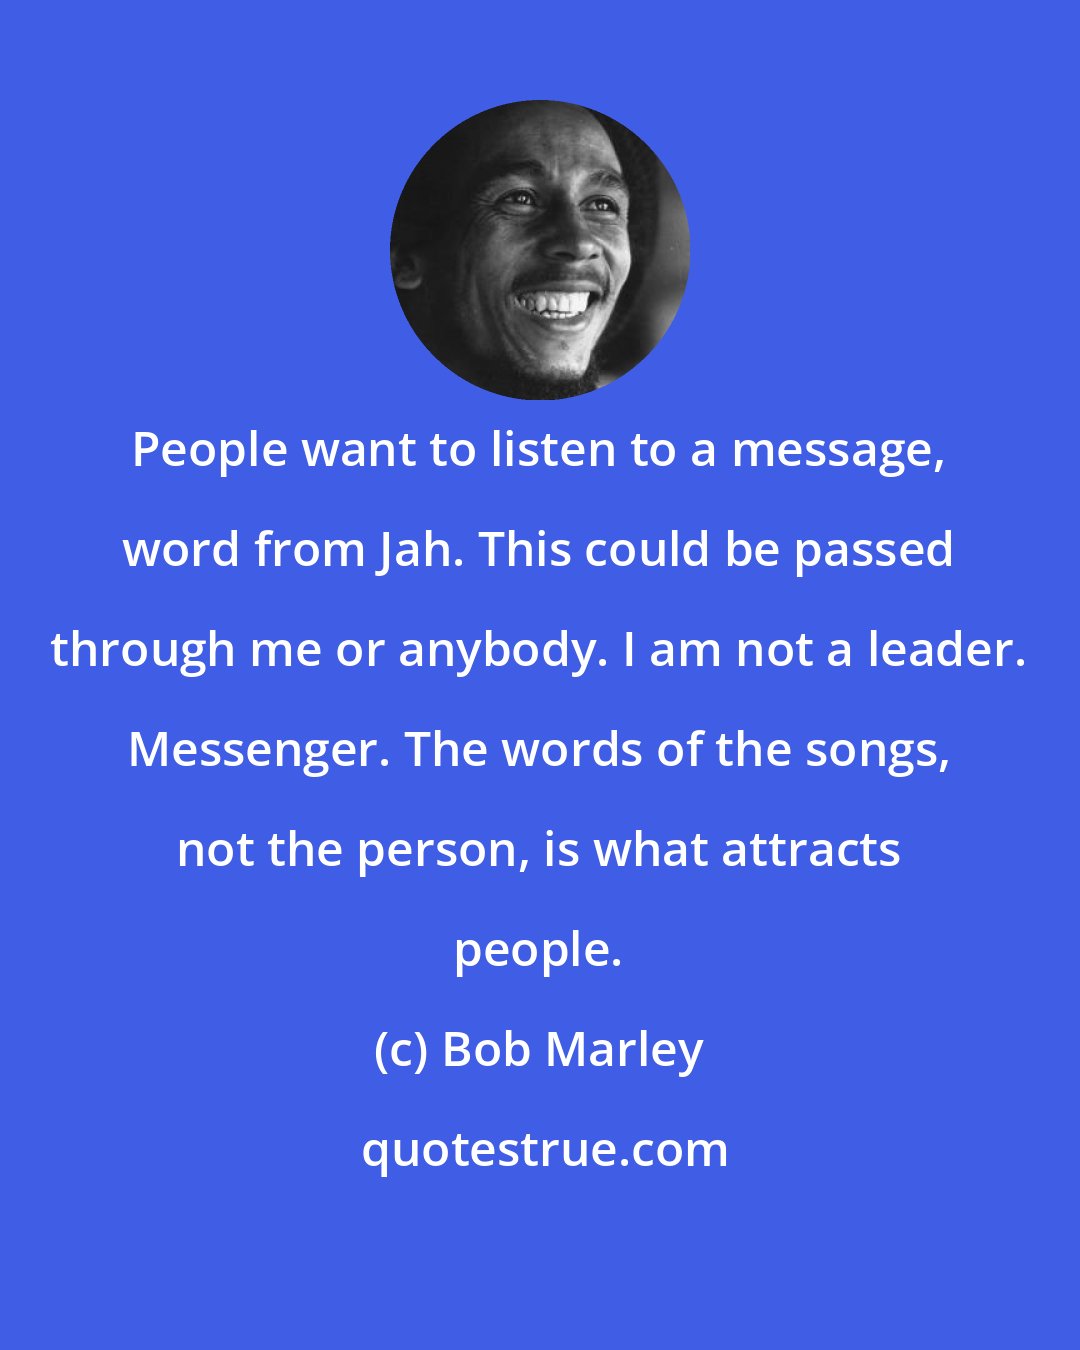 Bob Marley: People want to listen to a message, word from Jah. This could be passed through me or anybody. I am not a leader. Messenger. The words of the songs, not the person, is what attracts people.